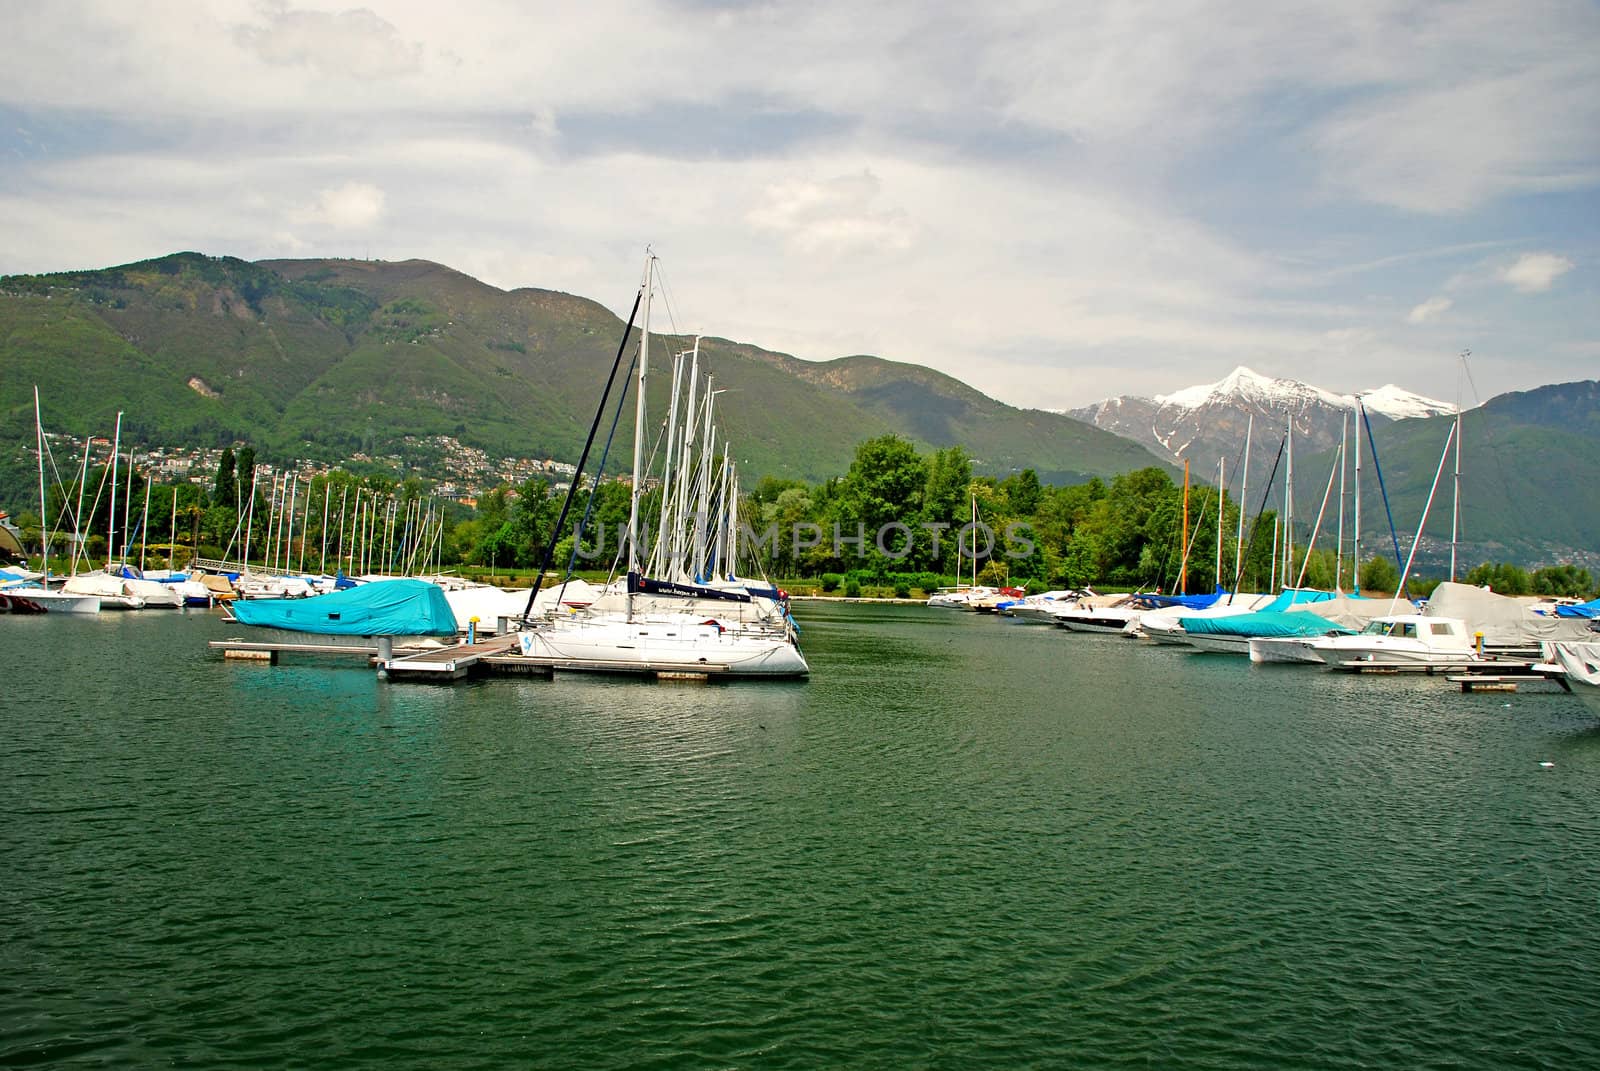 There is a sailing port and yacht club in Ascona, in Lake Maggiore. Behind yachts, there is a park,  at the background ther is a part of Locarno city and Alps with snow covered peaks of   Trosa and Madone mountains and cloudy sky